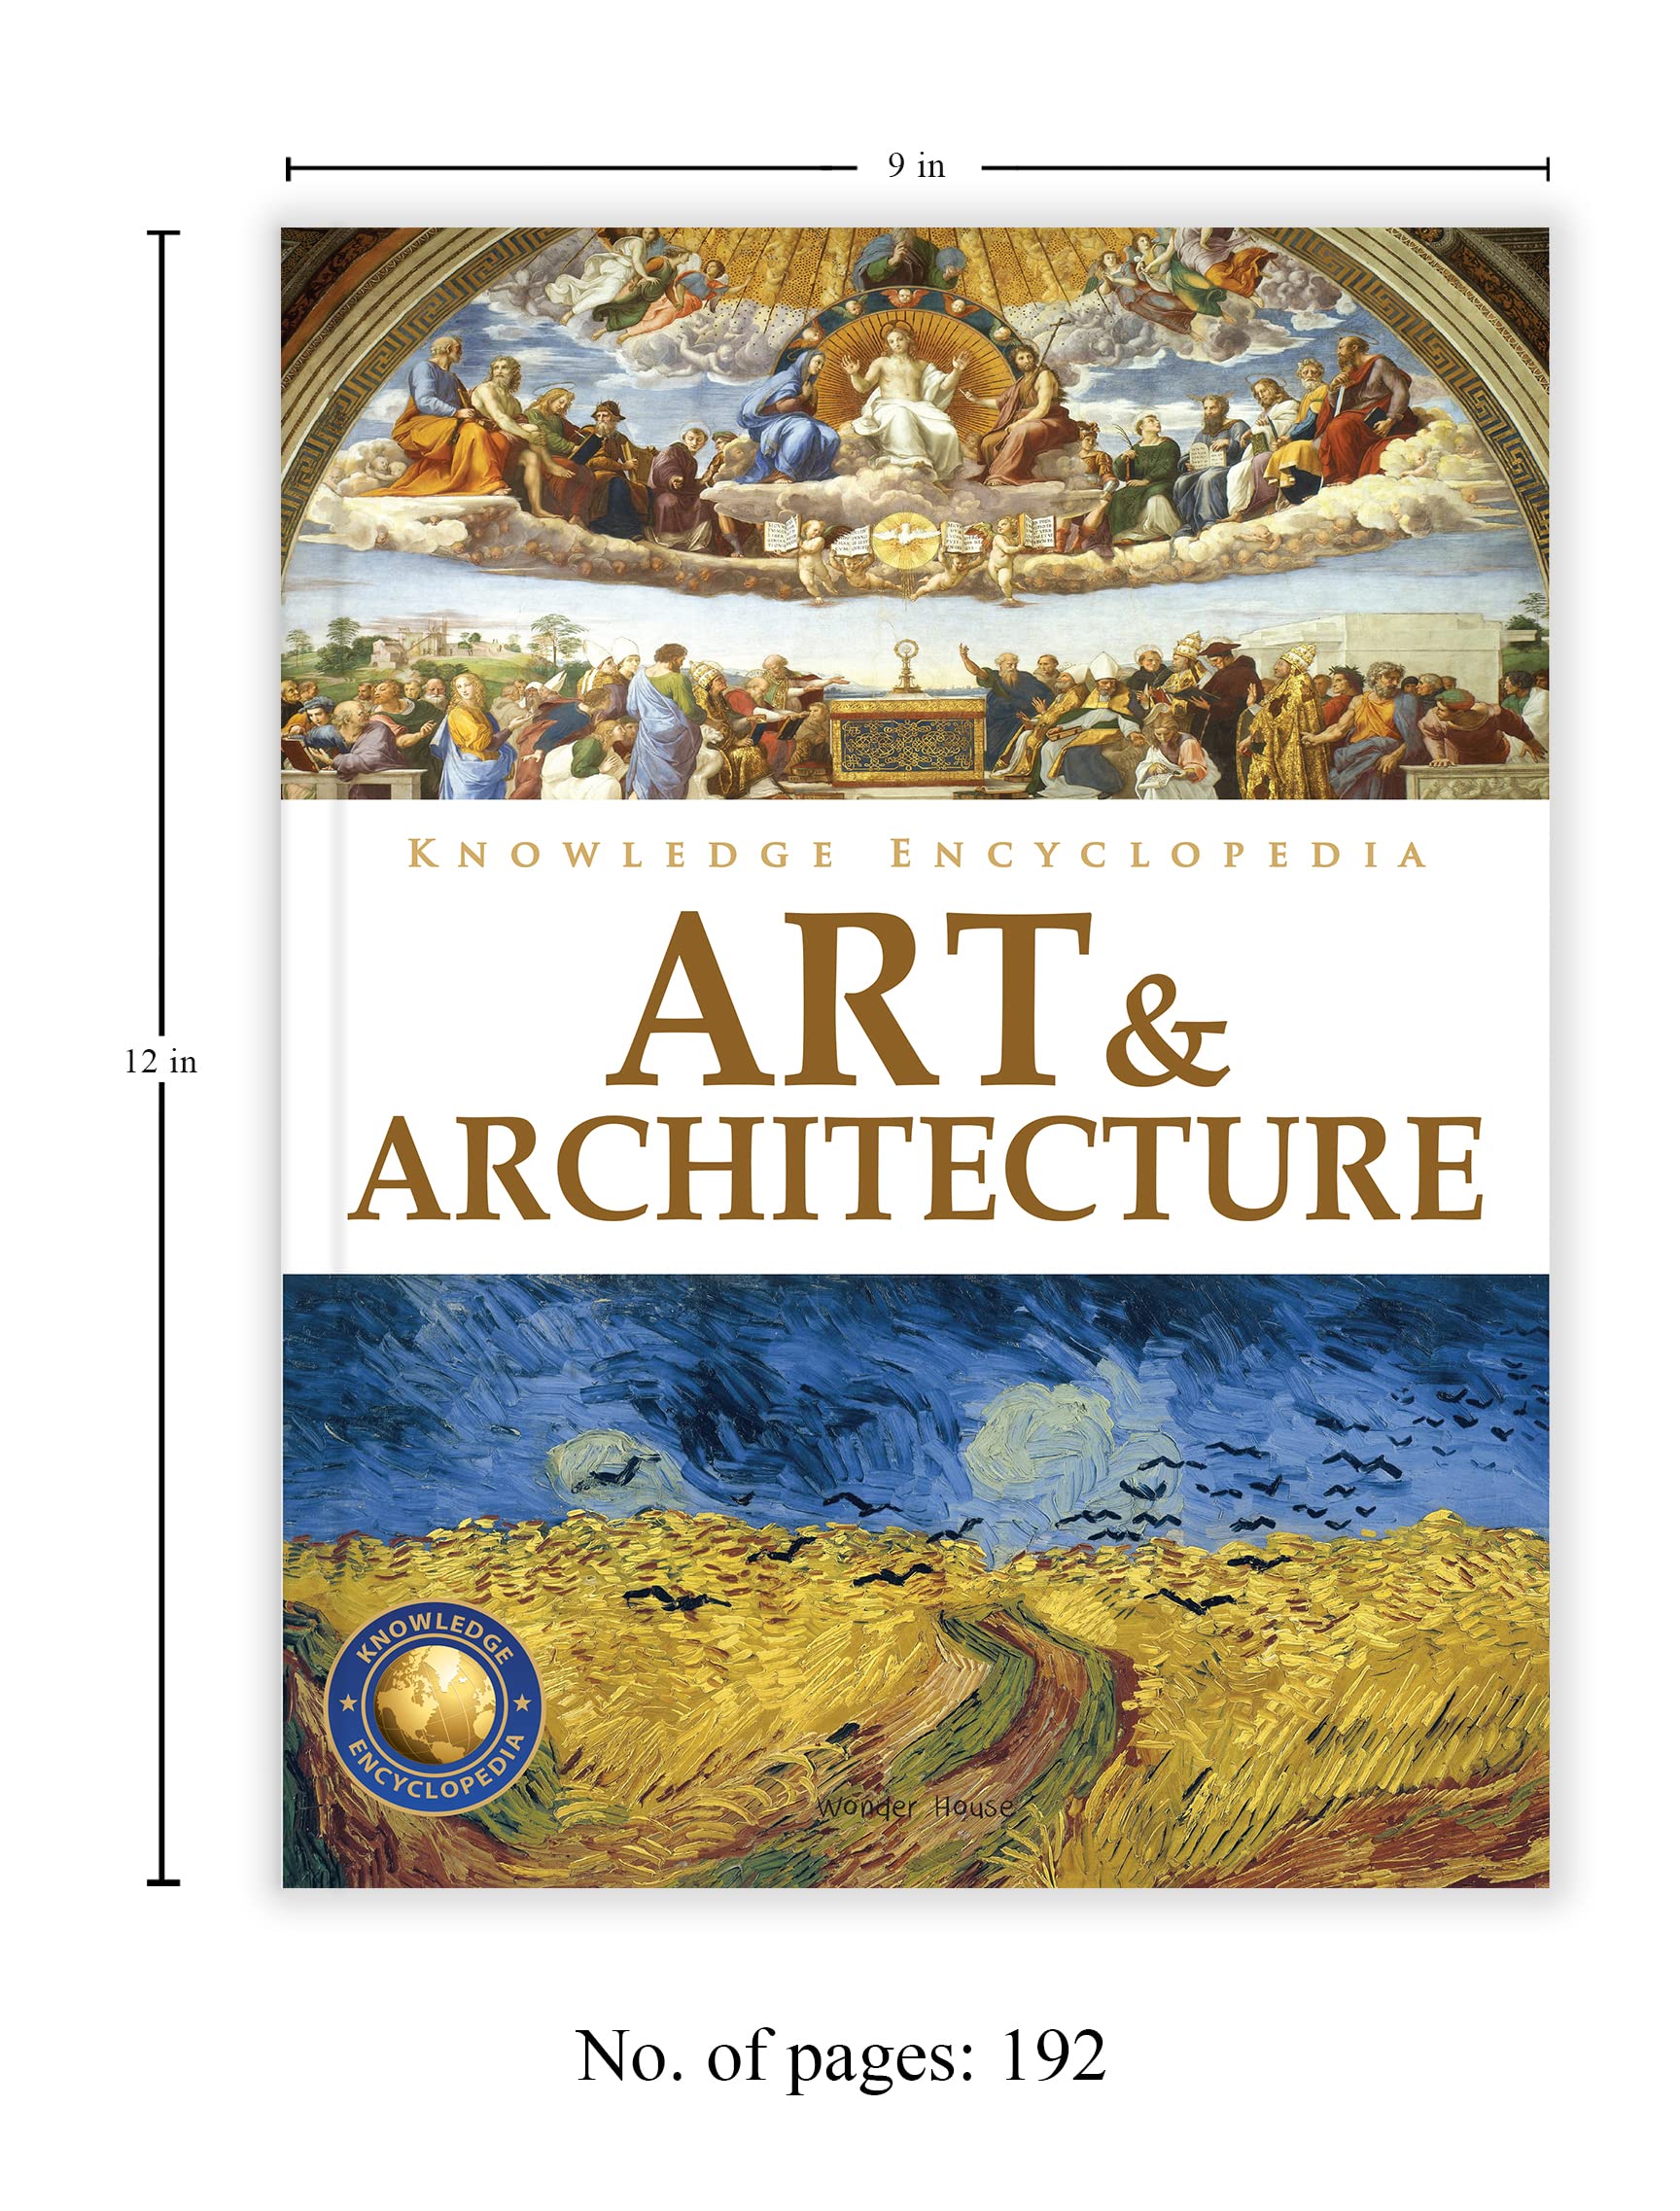 Knowledge Encyclopedia: Art & Architecture (Knowledge Encyclopedia For Children)